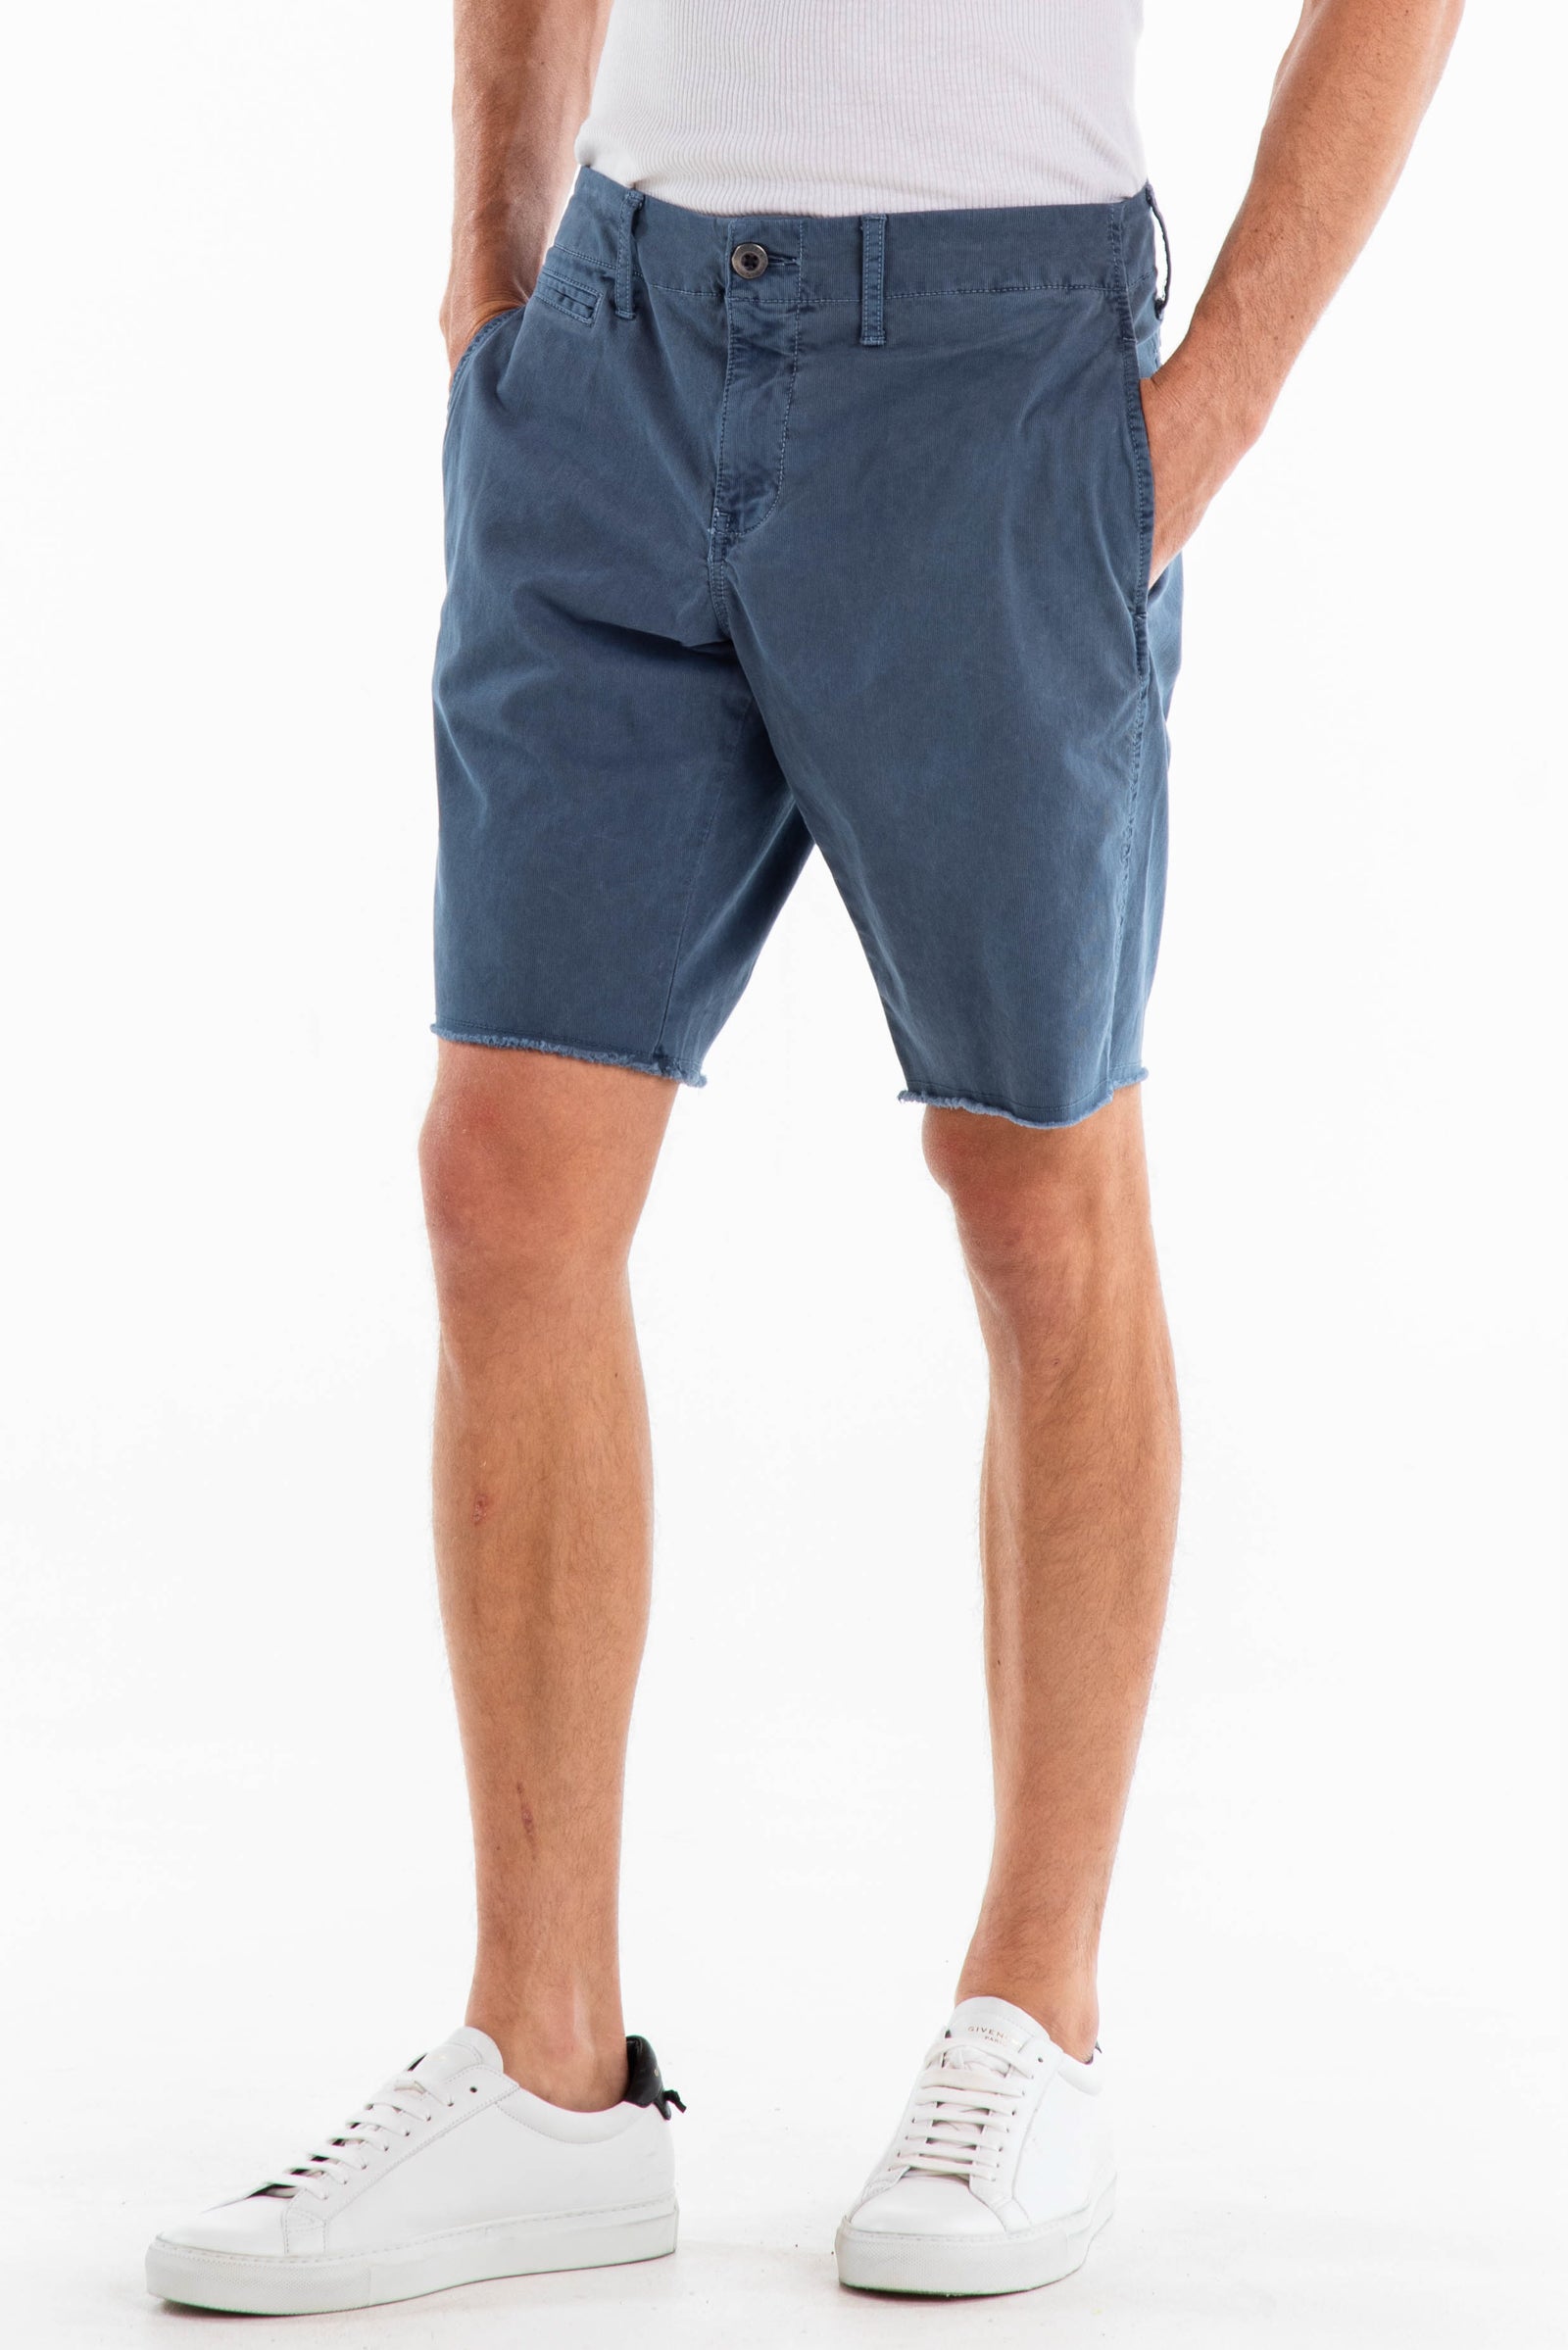 Original Paperbacks Rockland Chino Short in Slate on Model Cropped Styled View